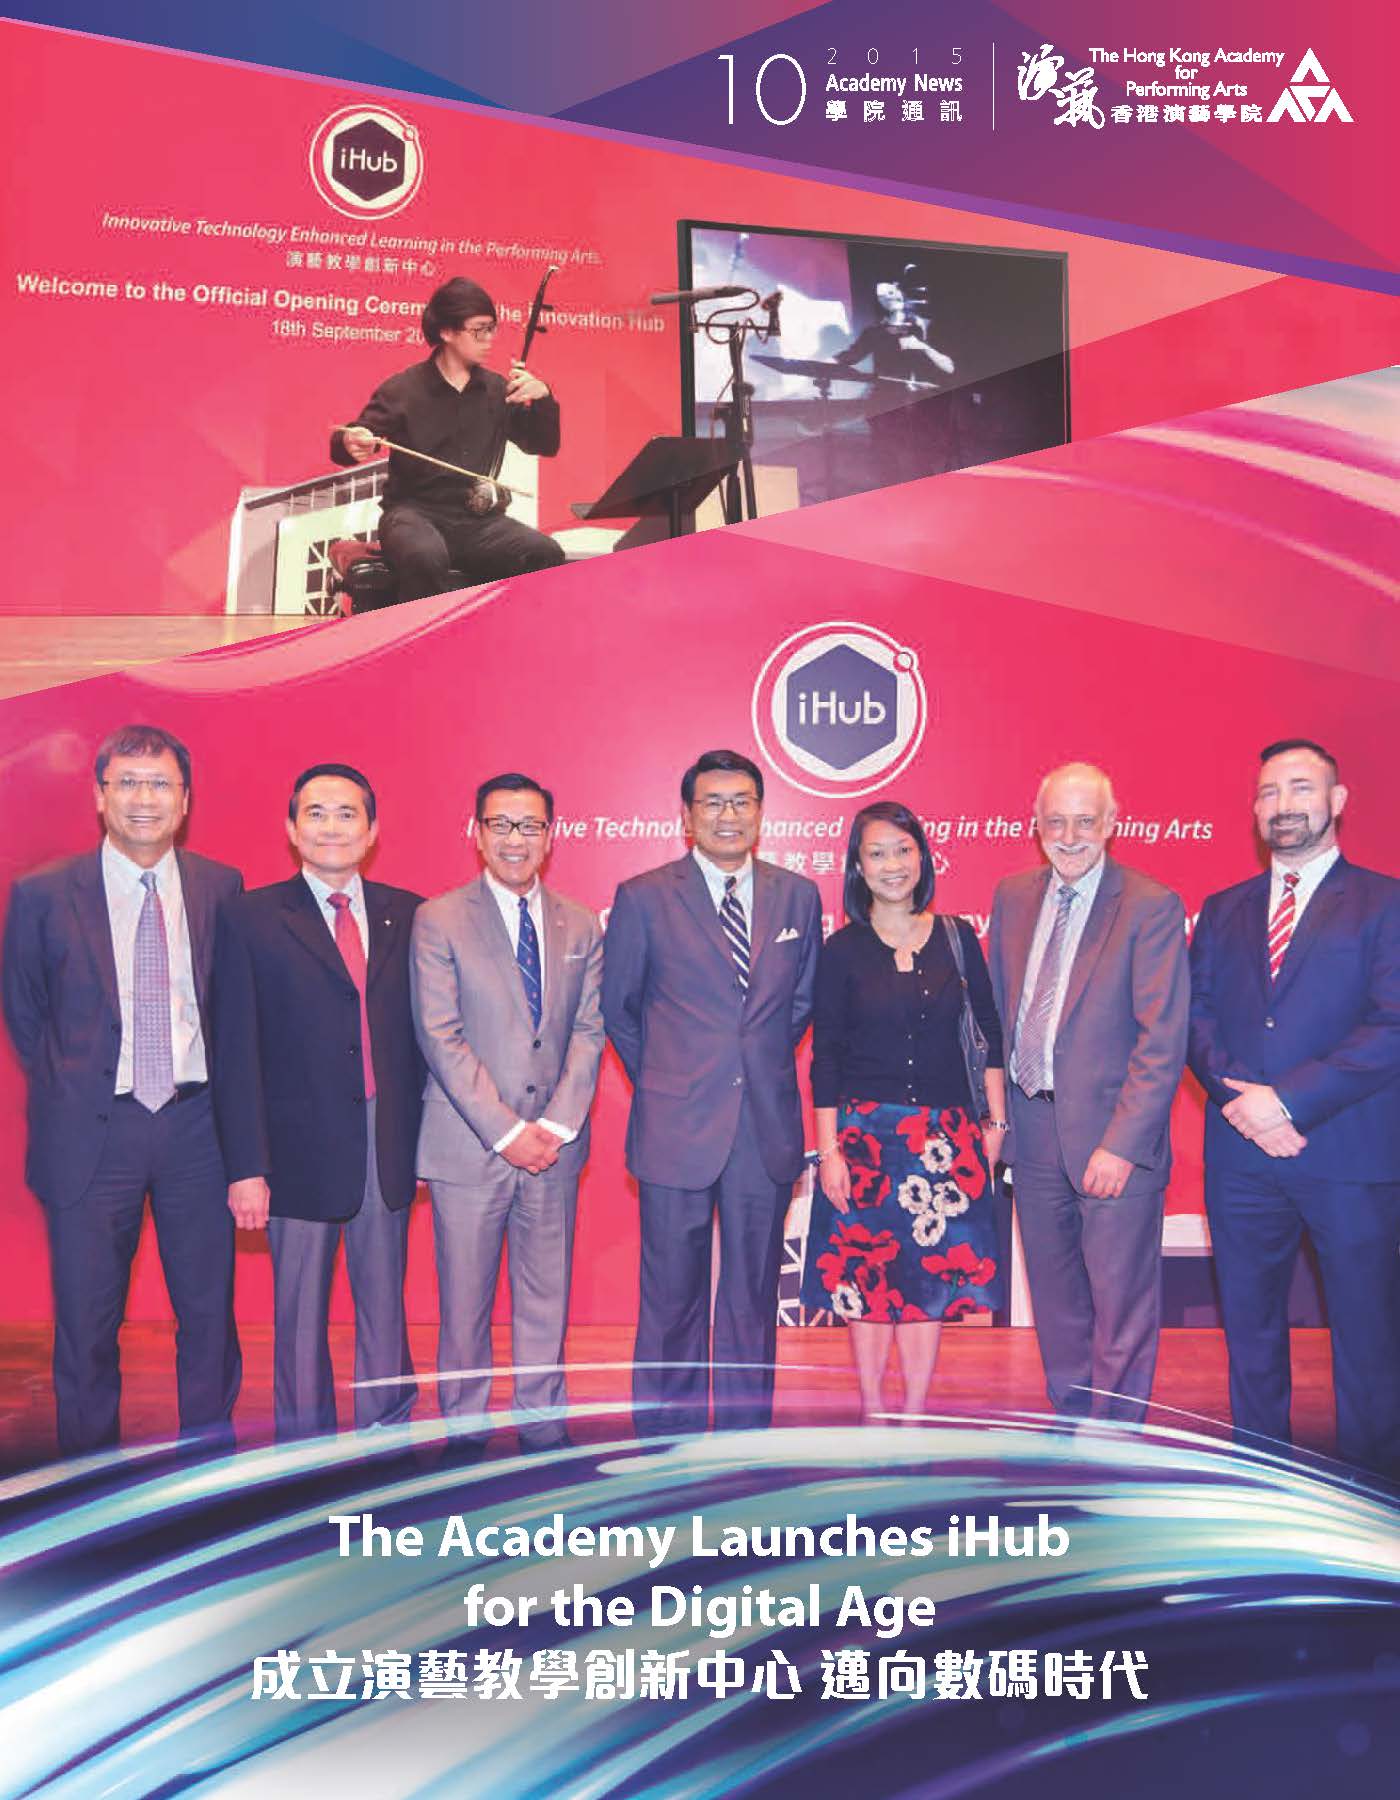 Academy News October 2015 issue